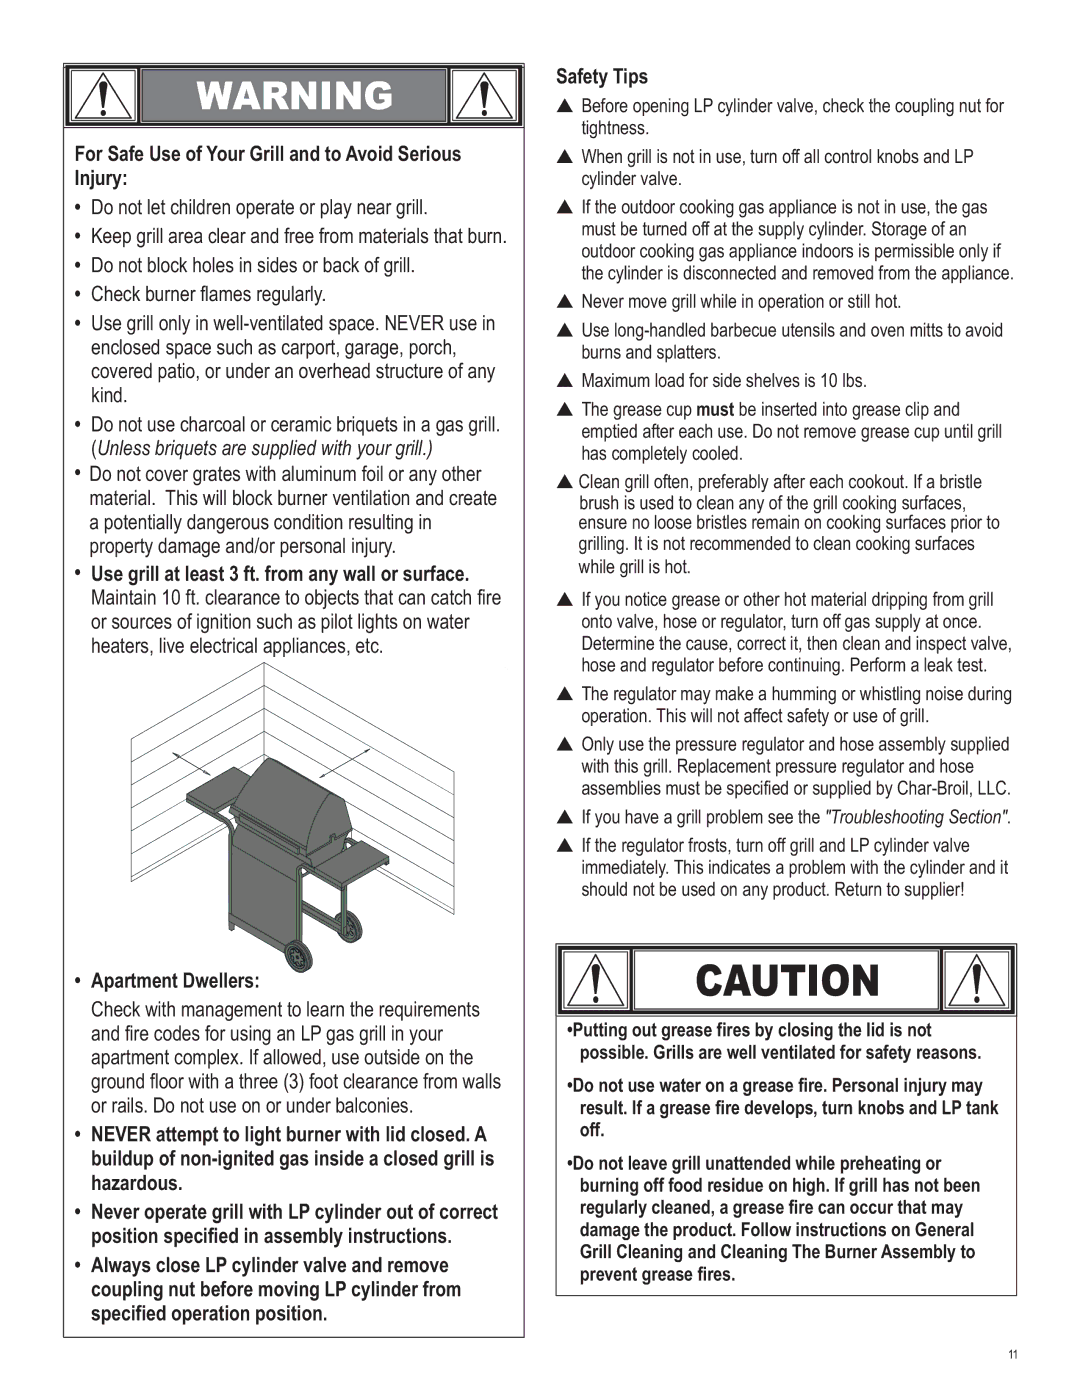 Char-Broil 463620412 manual For Safe Use of Your Grill and to Avoid Serious Injury 